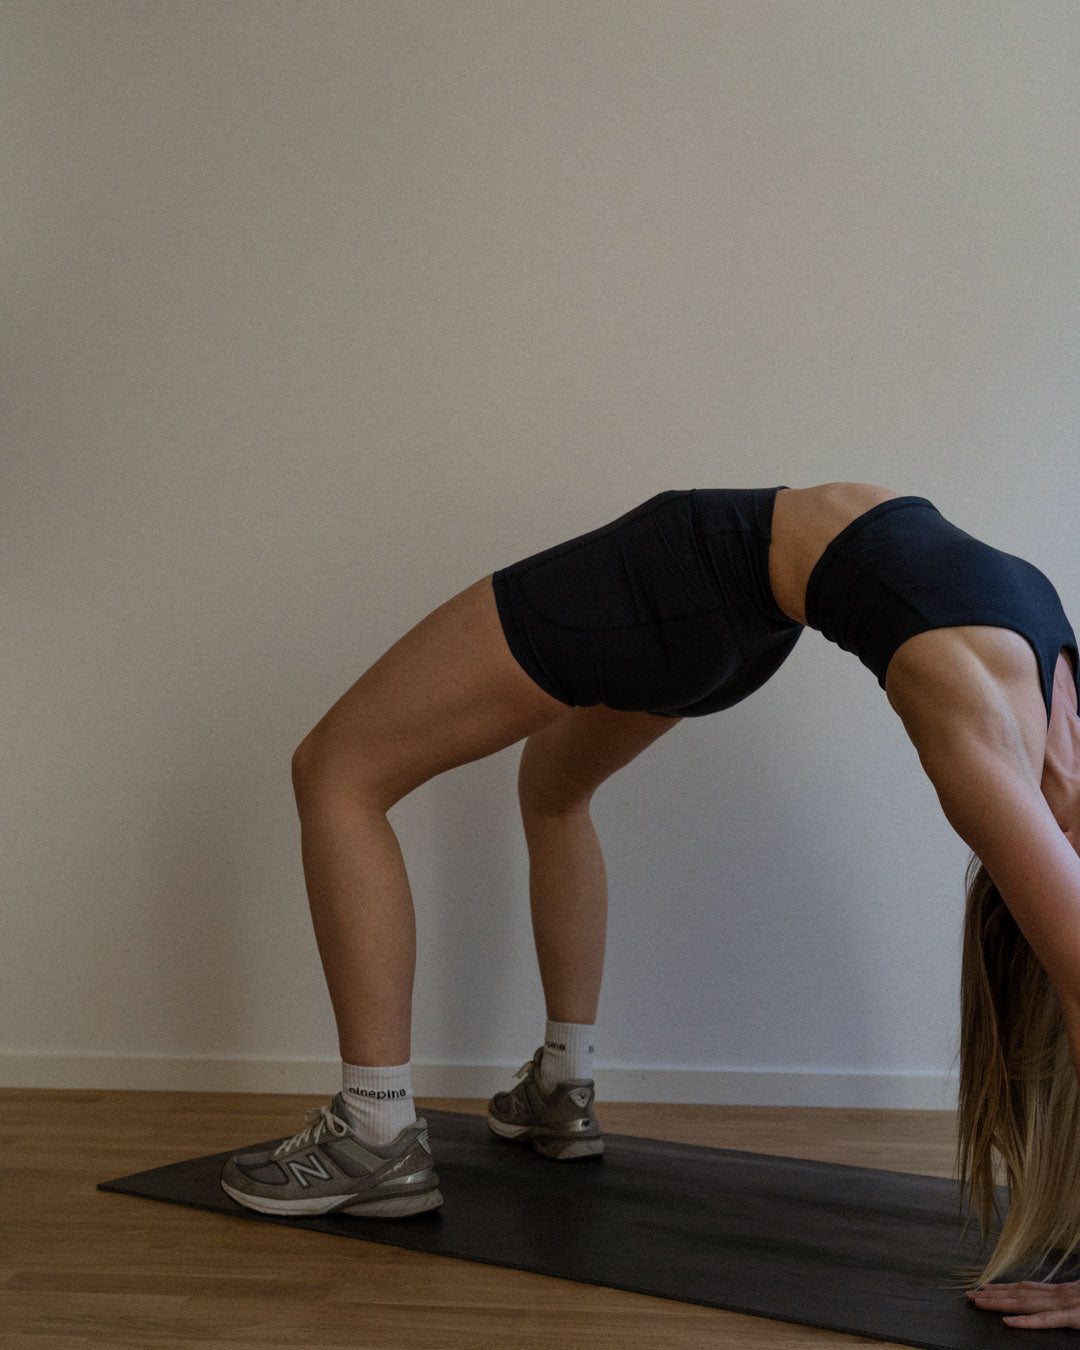 Woman in Ninepine sports bra and biker shorts performing a yoga bridge position